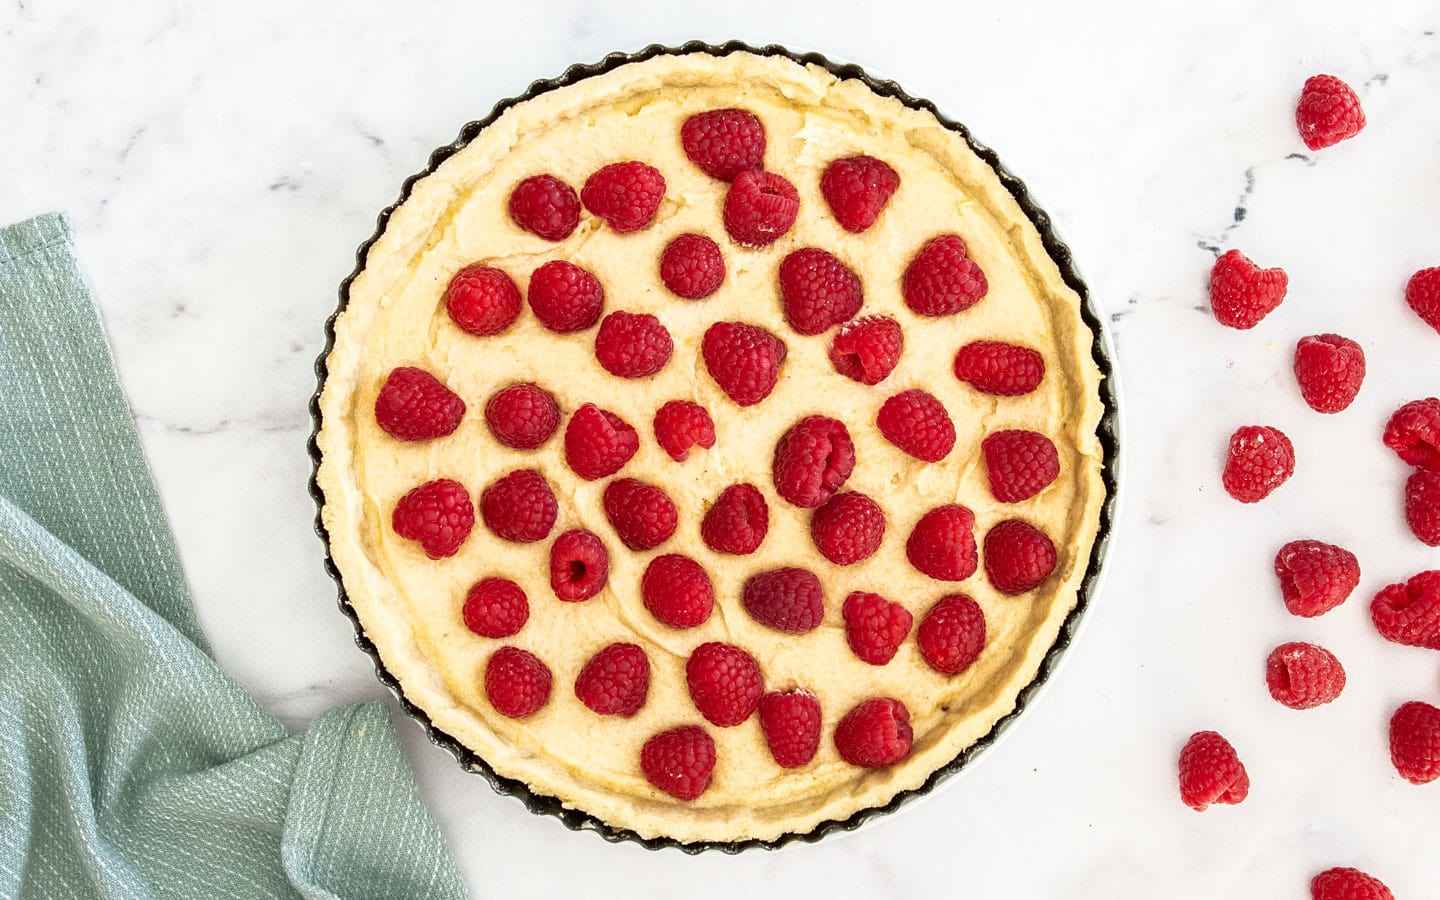 The tart shell filled with frangipane and raspberries.